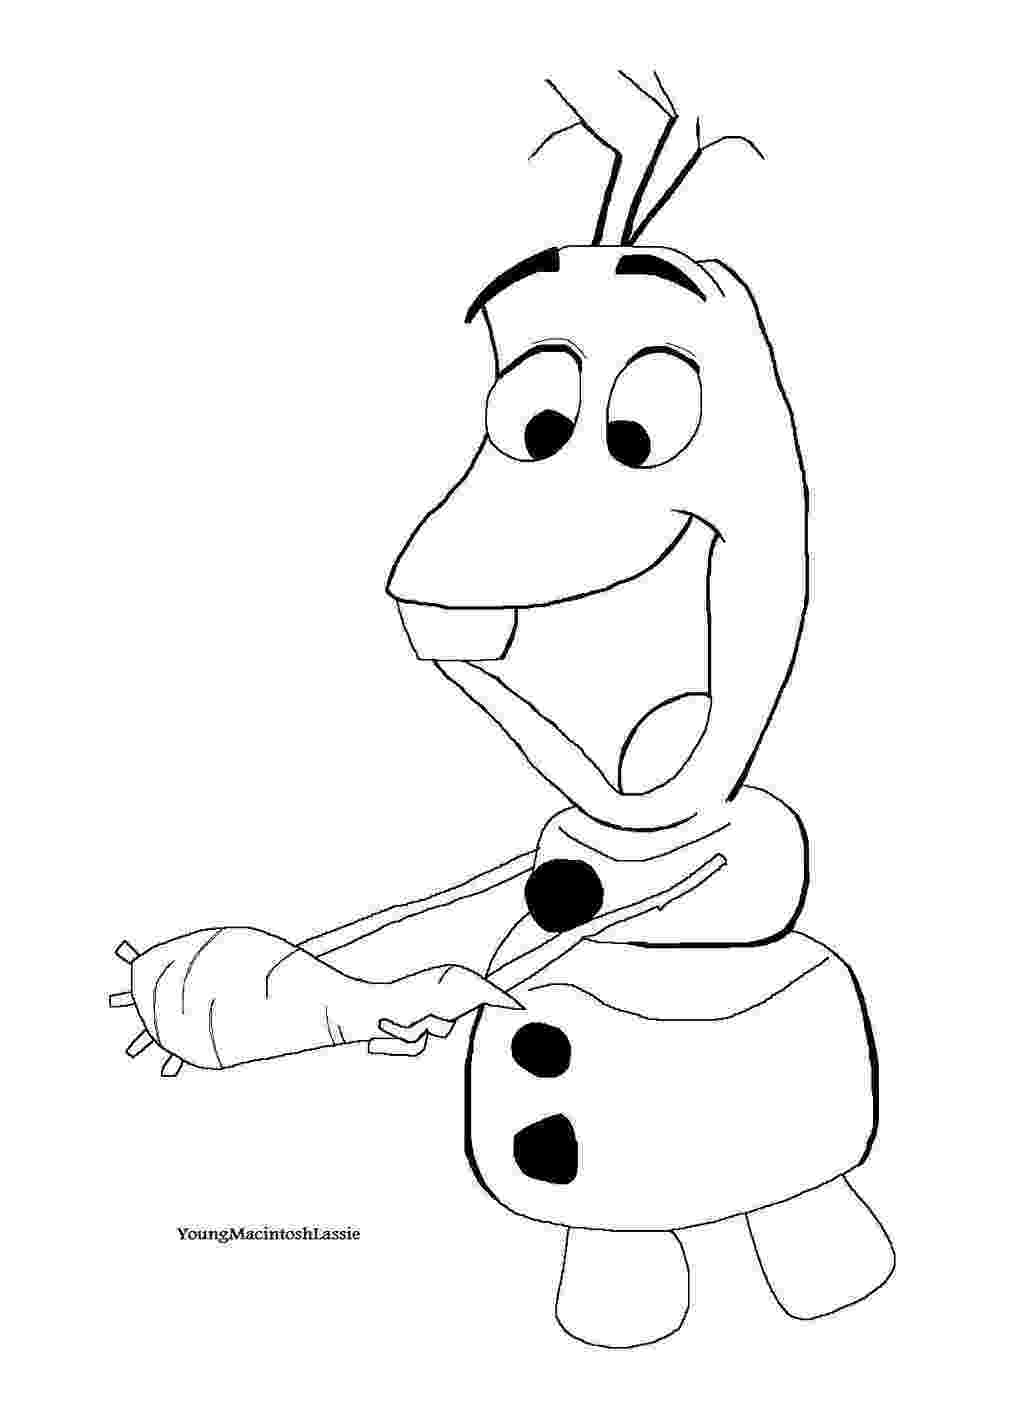 olaf pictures to print printable olaf disney frozen coloring pages print to pictures olaf 